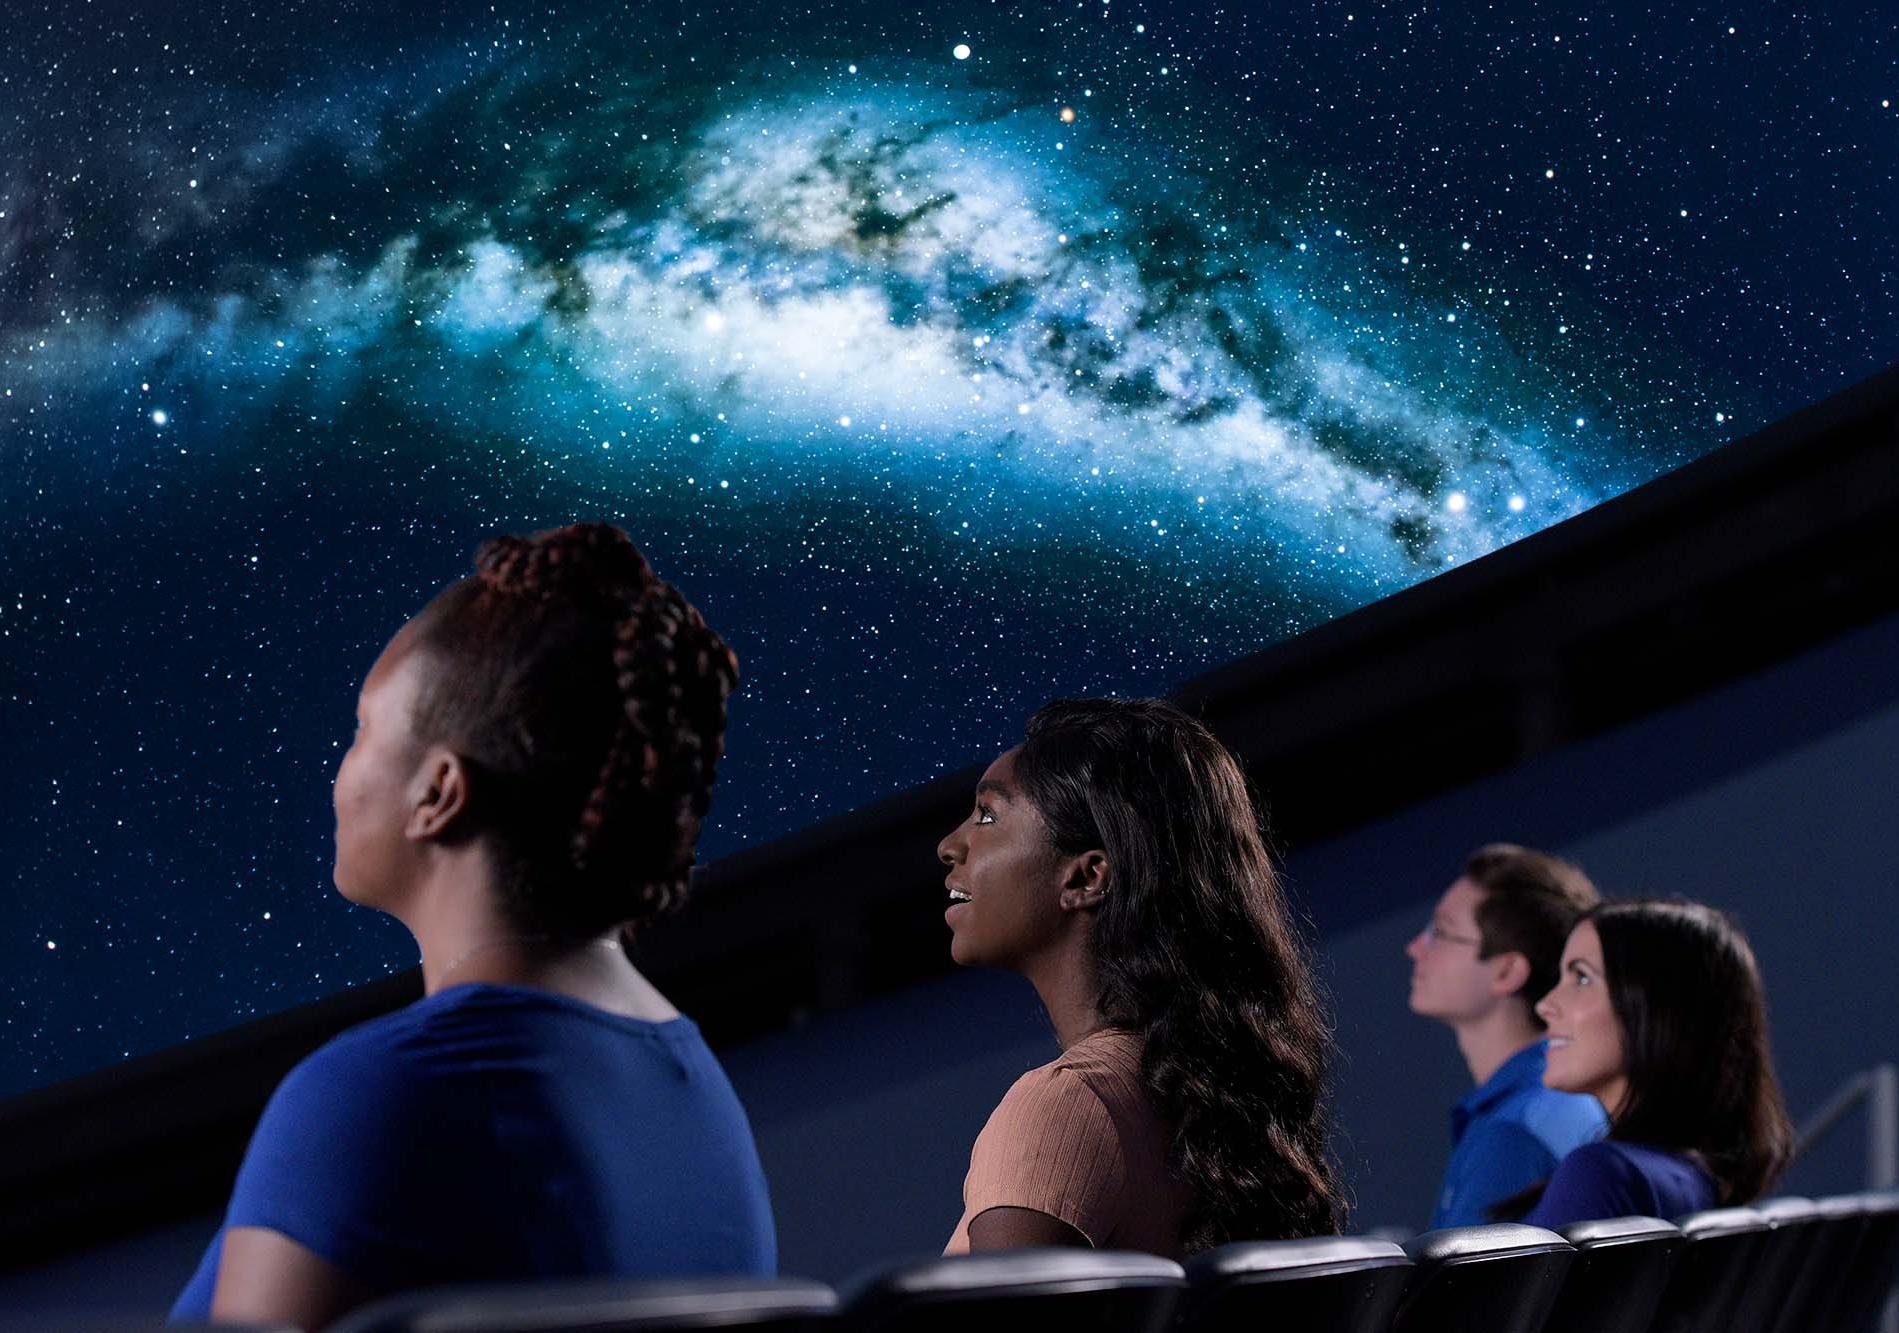 Close up image of four people shown from a back/side profile as they look up to watch a projection of the Milky Way in a planetarium dome